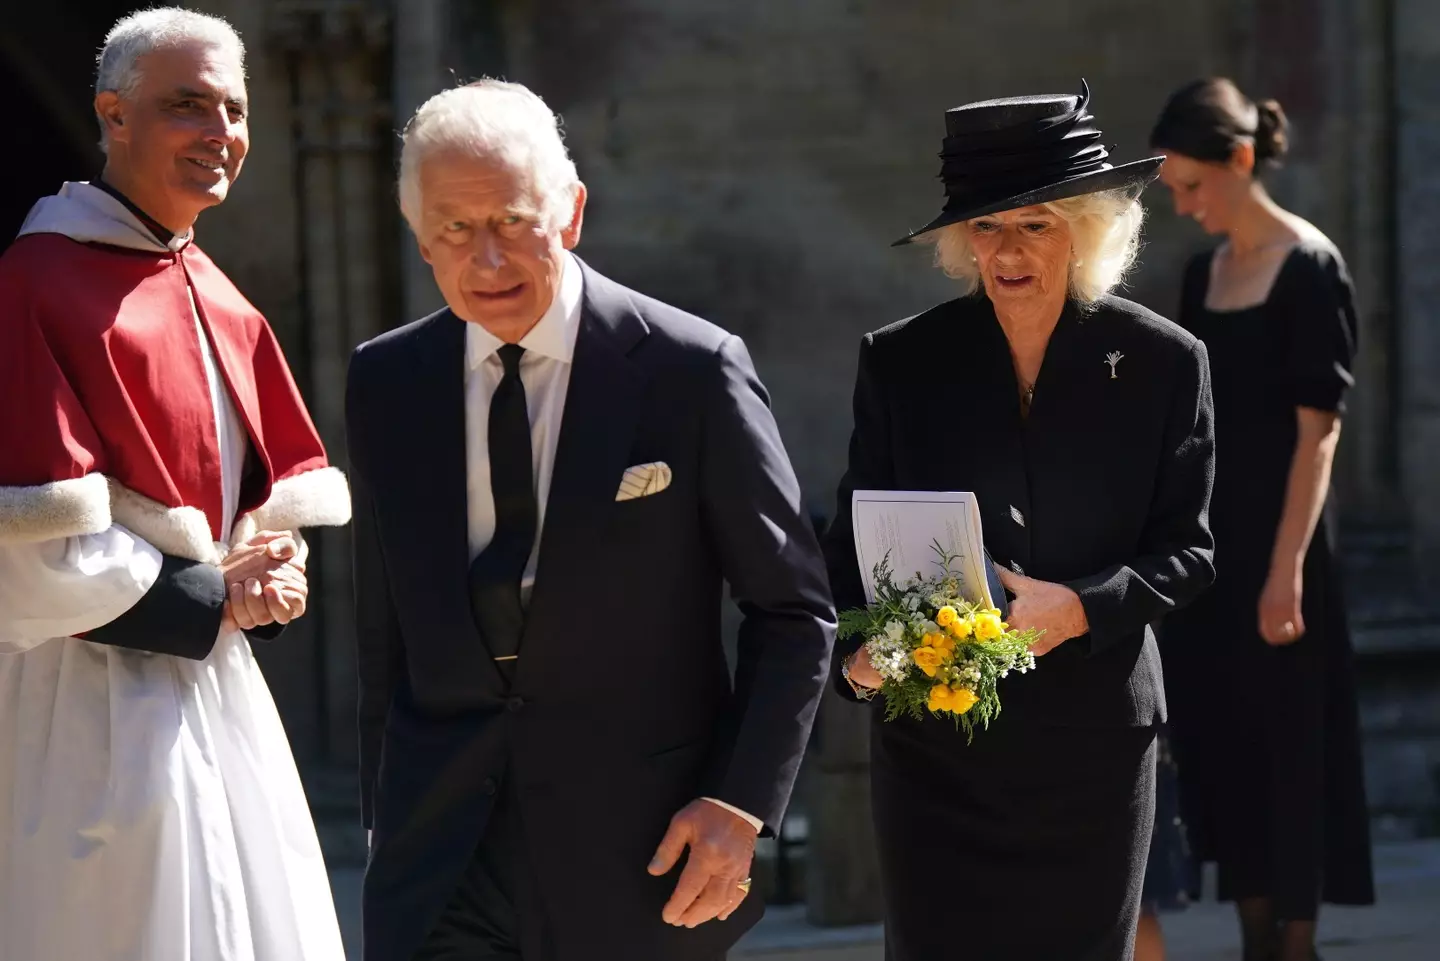 King Charles III and the Queen Consort leave Llandaff Cathedral in Cardiff.